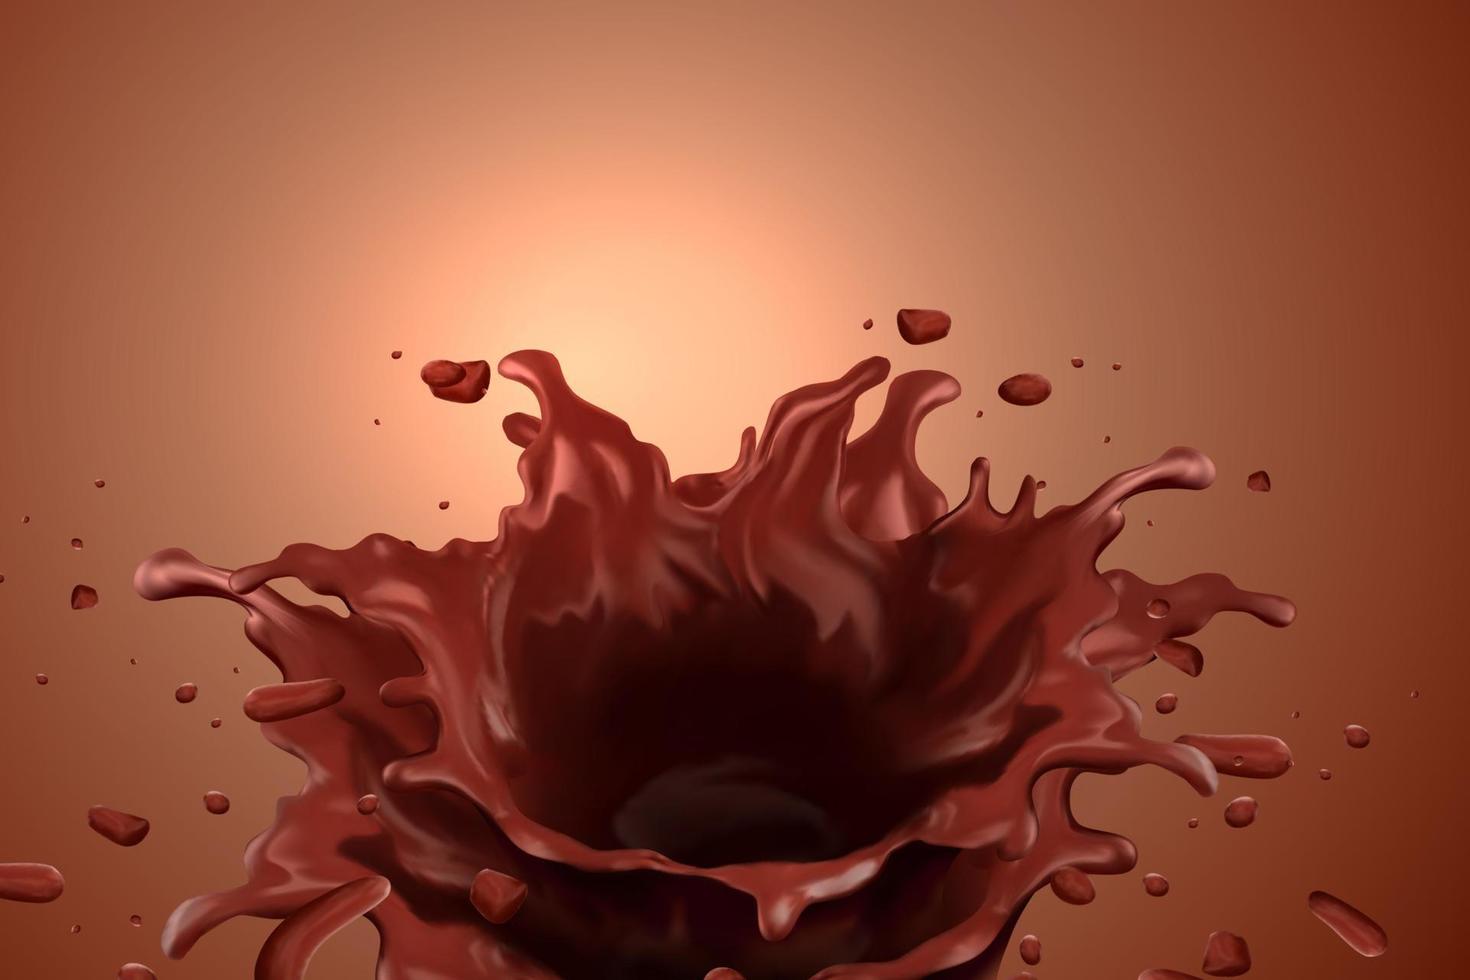 Chocolate splashing sauce in 3d illustration on brown background vector